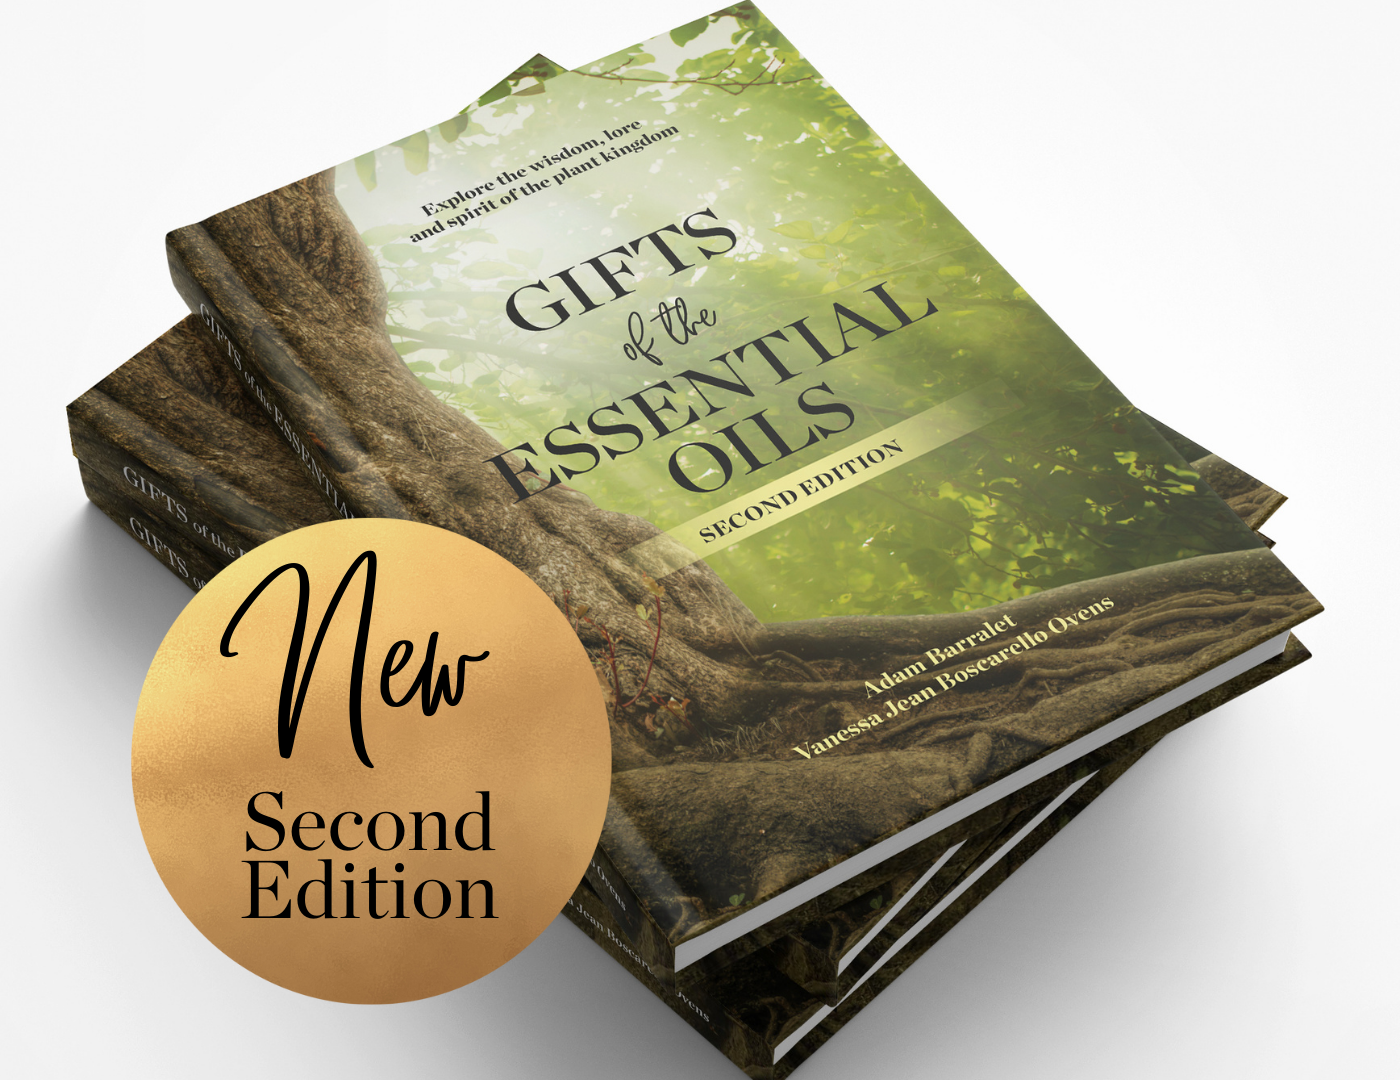 Gifts of the Esserntial Oils - 2nd Edition